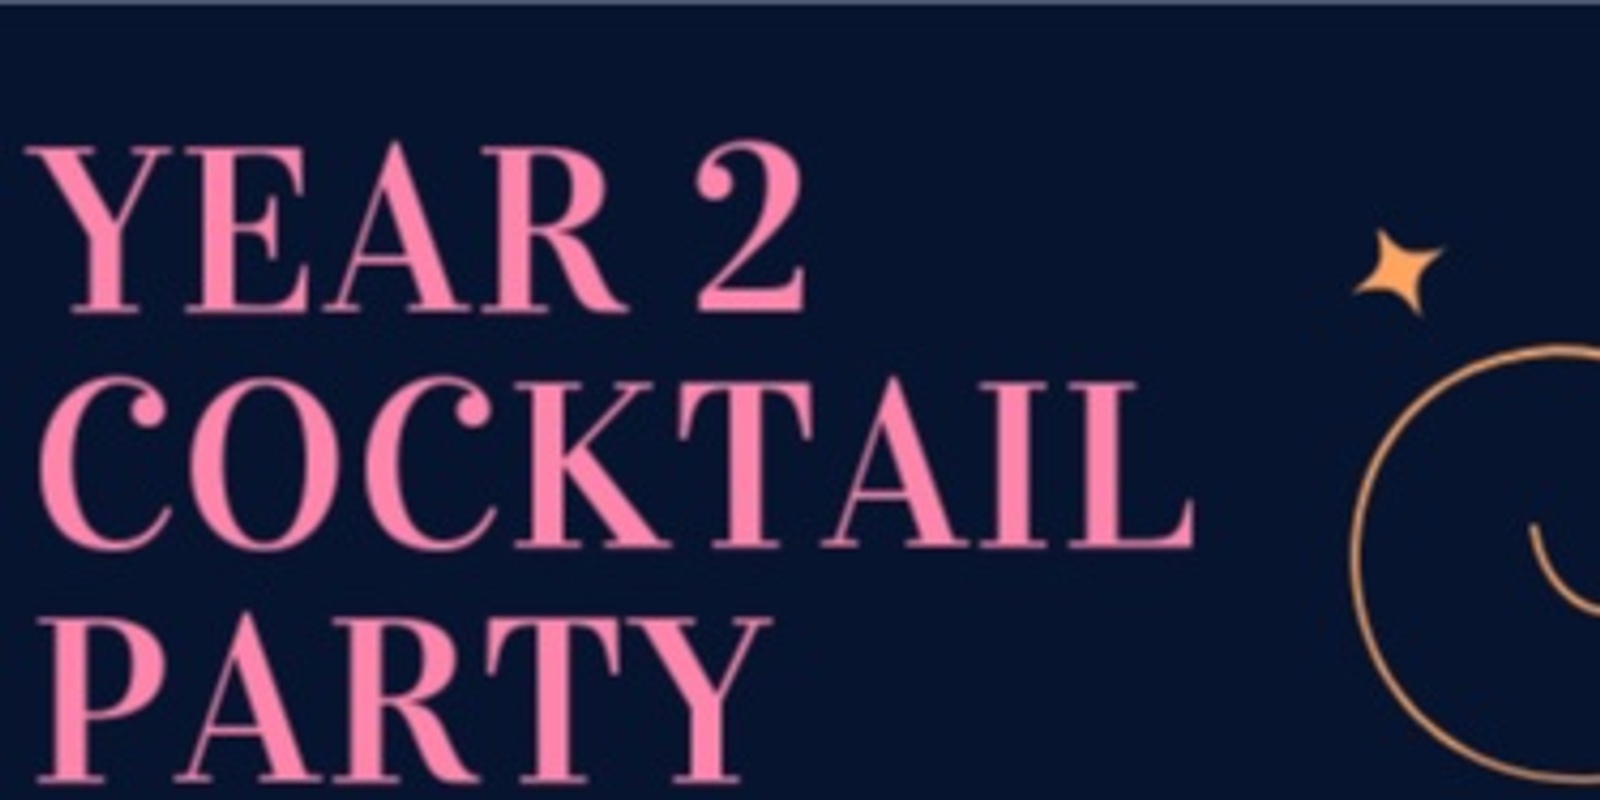 Banner image for CCPS Year 2 Cocktail Party